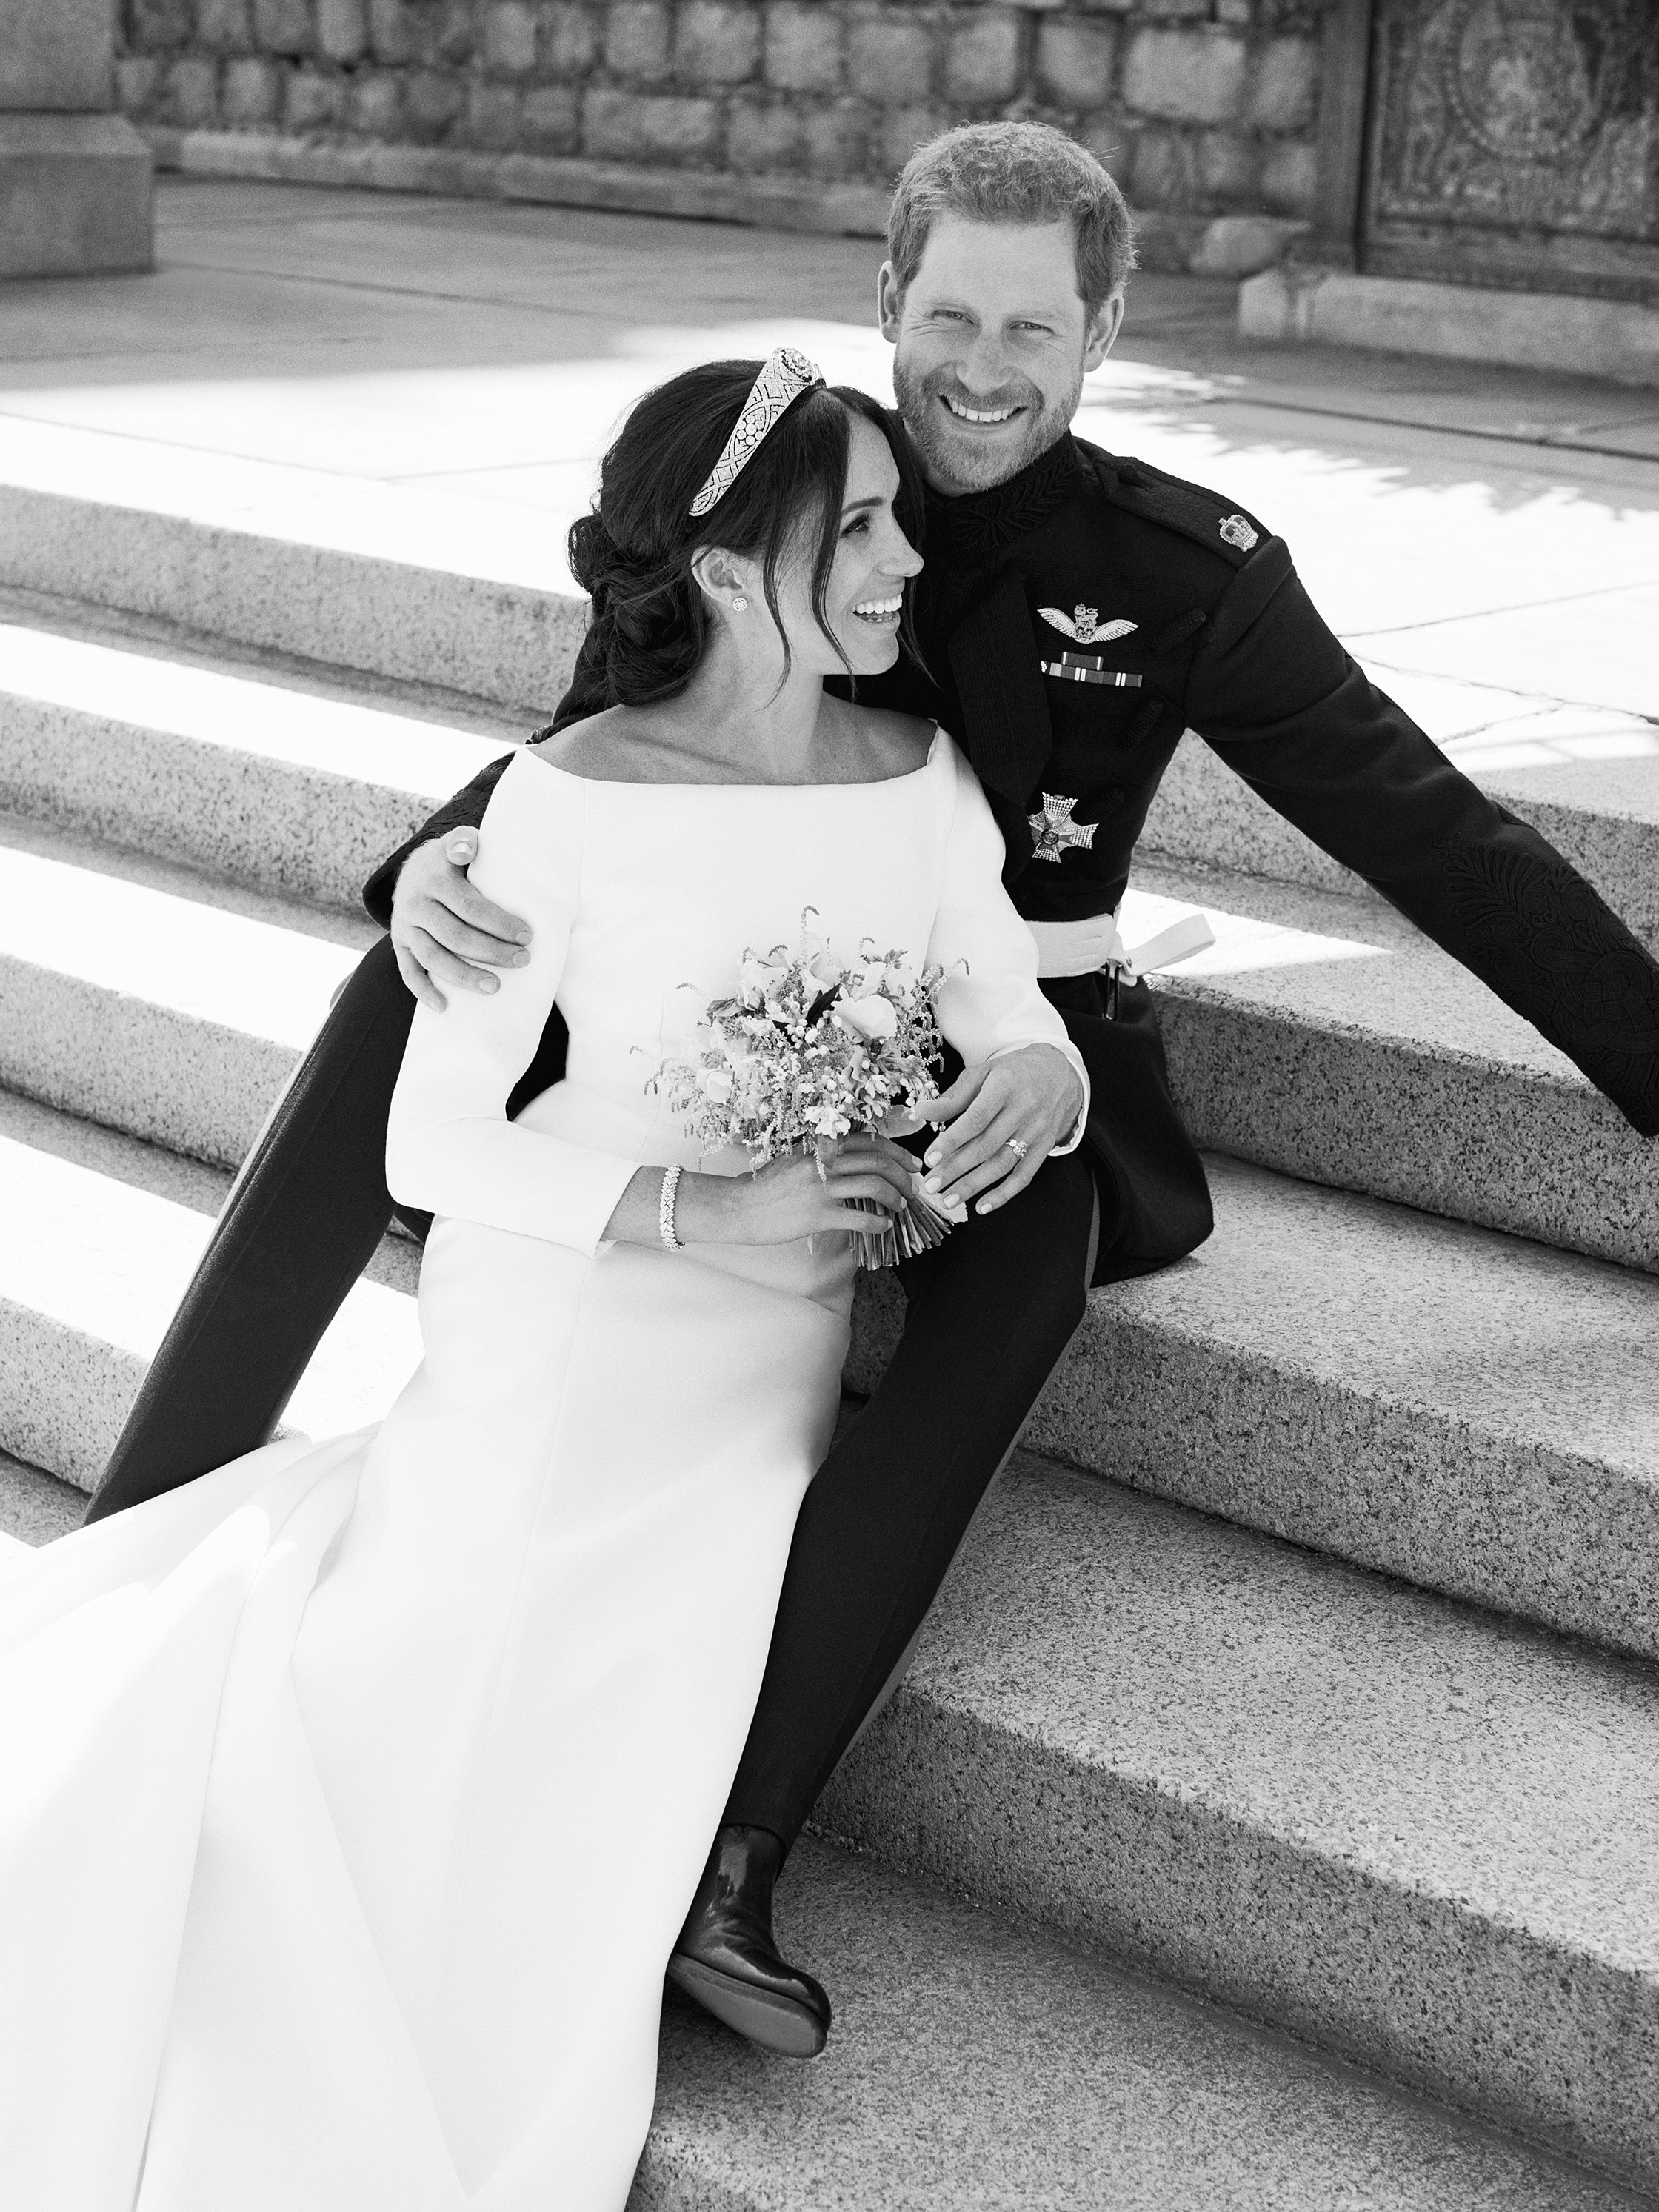 The Story Behind One Of Prince Harry And Meghan Markle's Best Wedding Portraits Is As Sweet As The Photo
